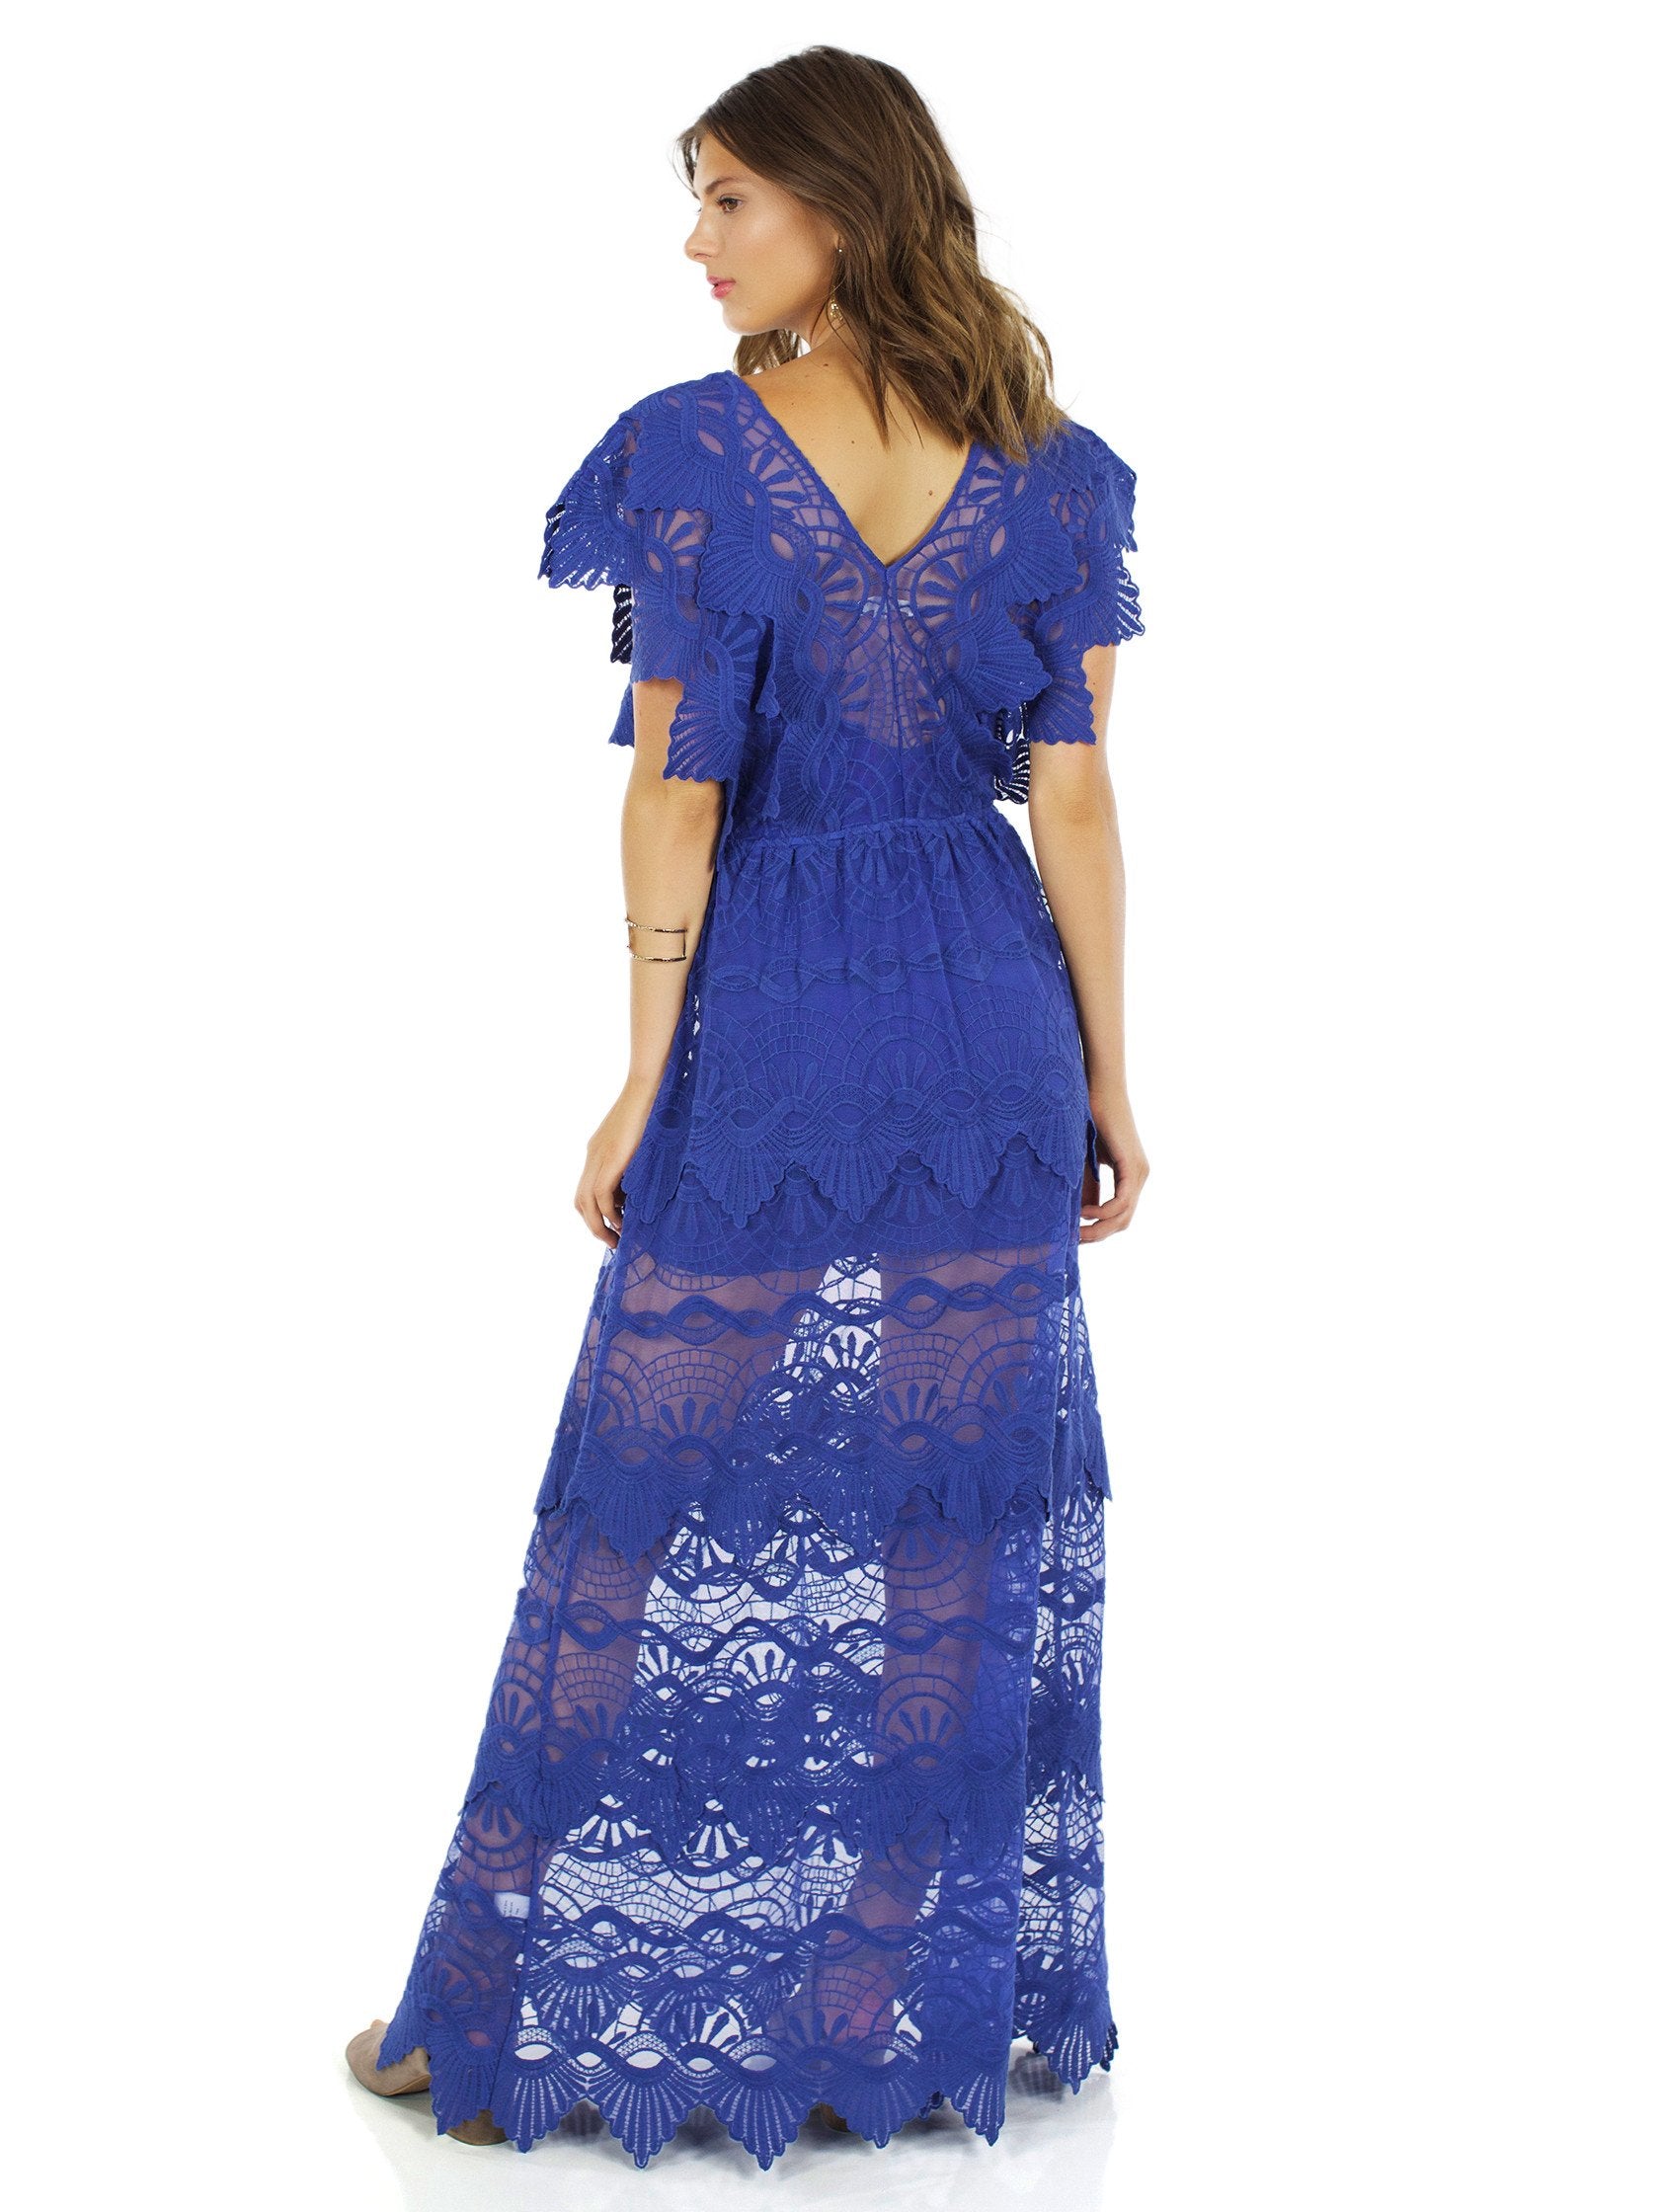 Women wearing a dress rental from Nightcap Clothing called Mayan Lace Gown